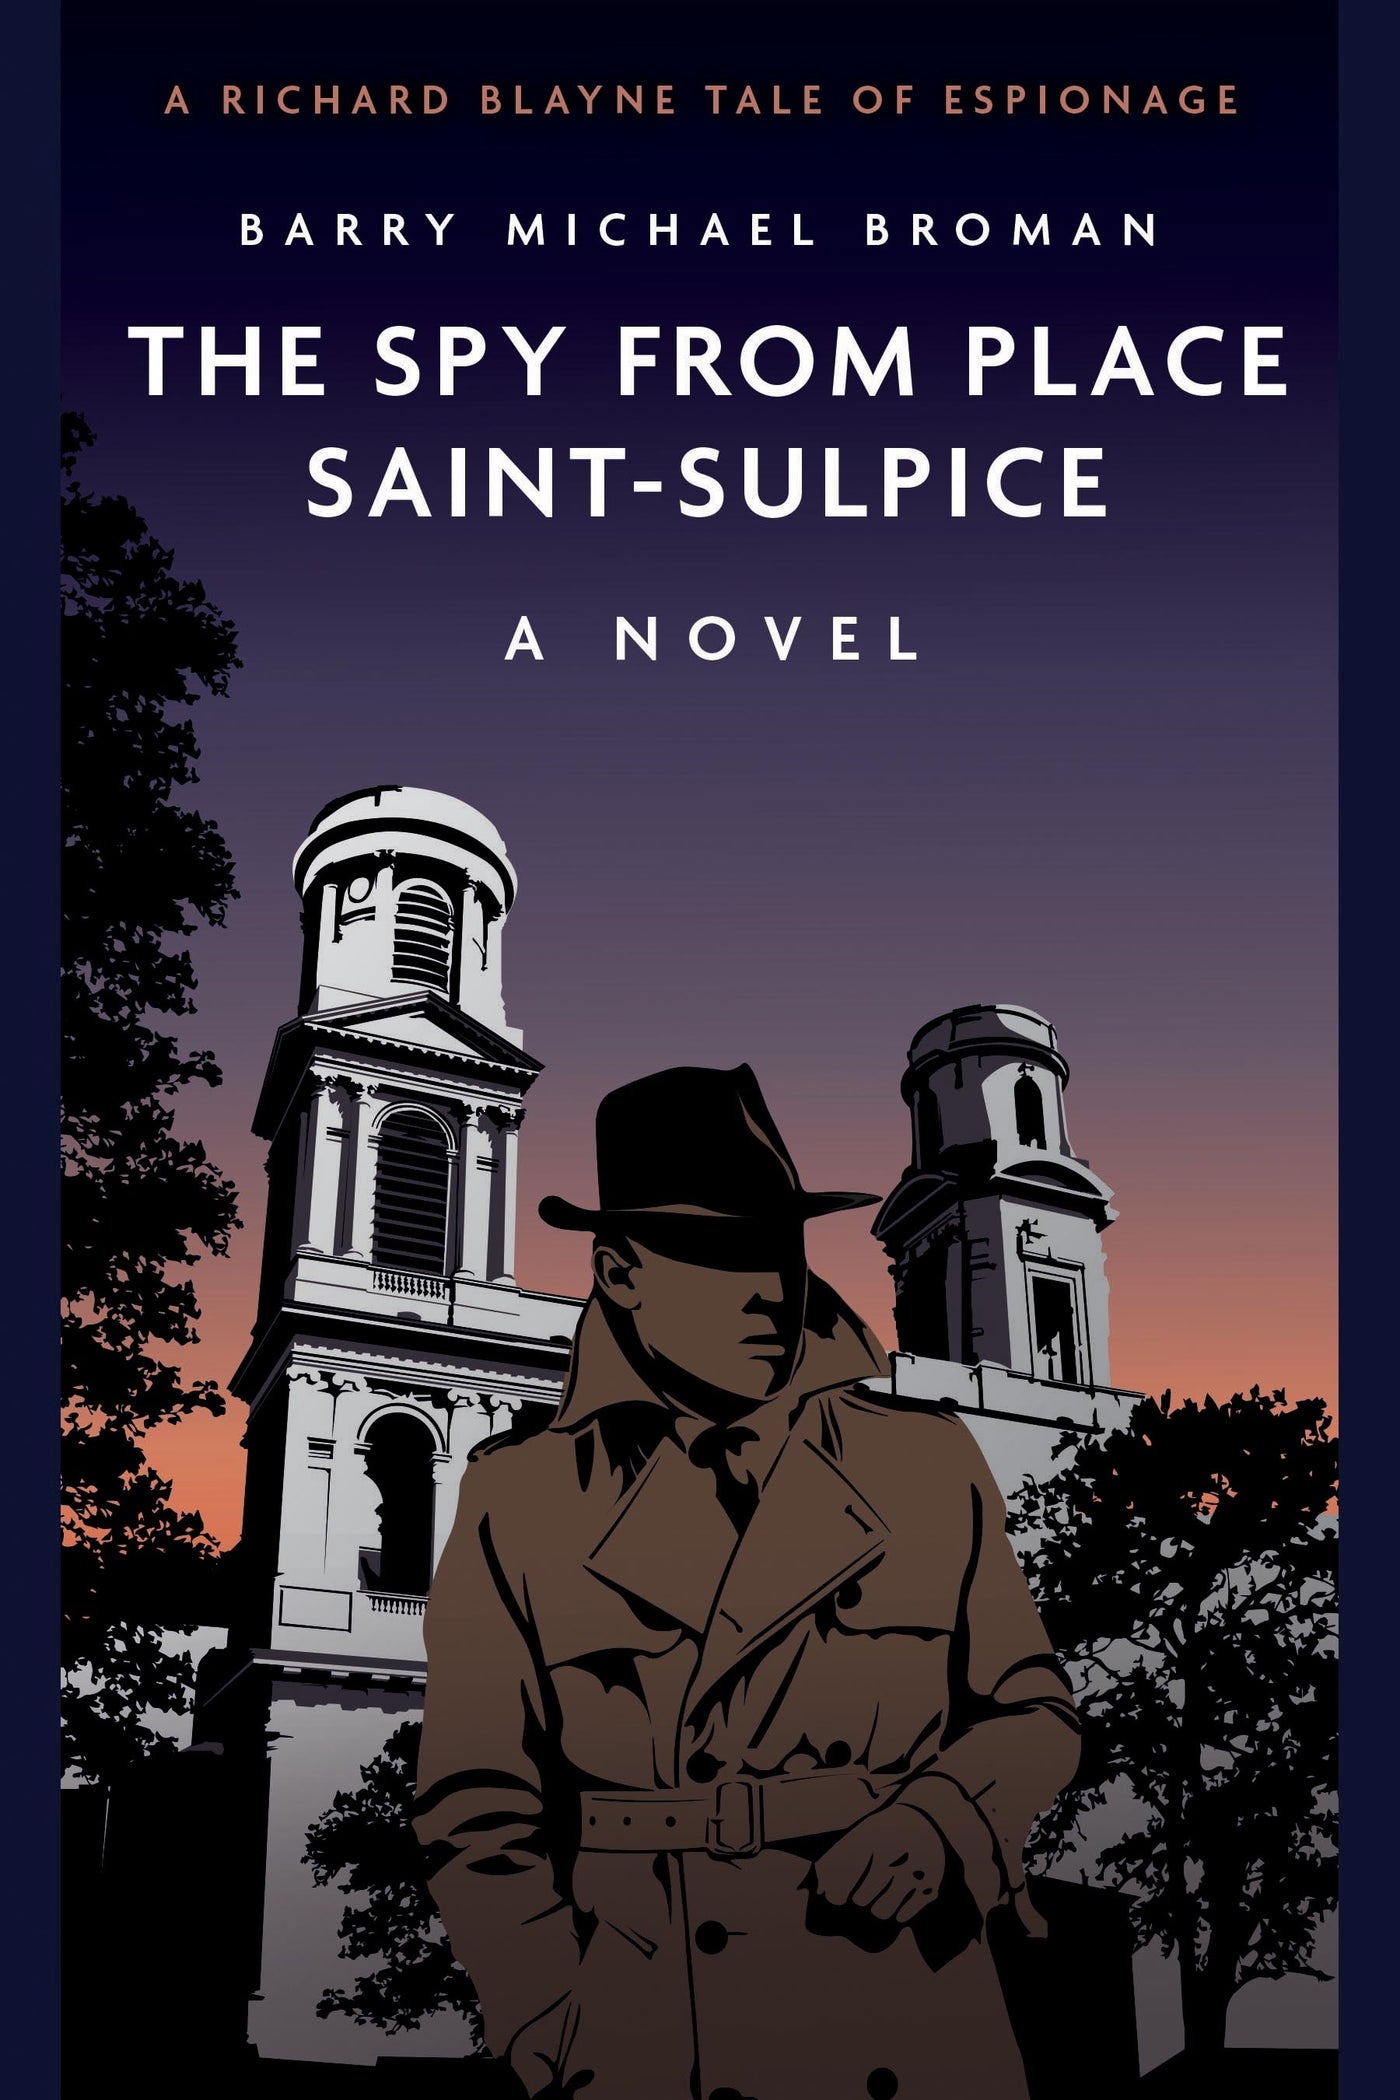 The Spy from Place Saint-Sulpice